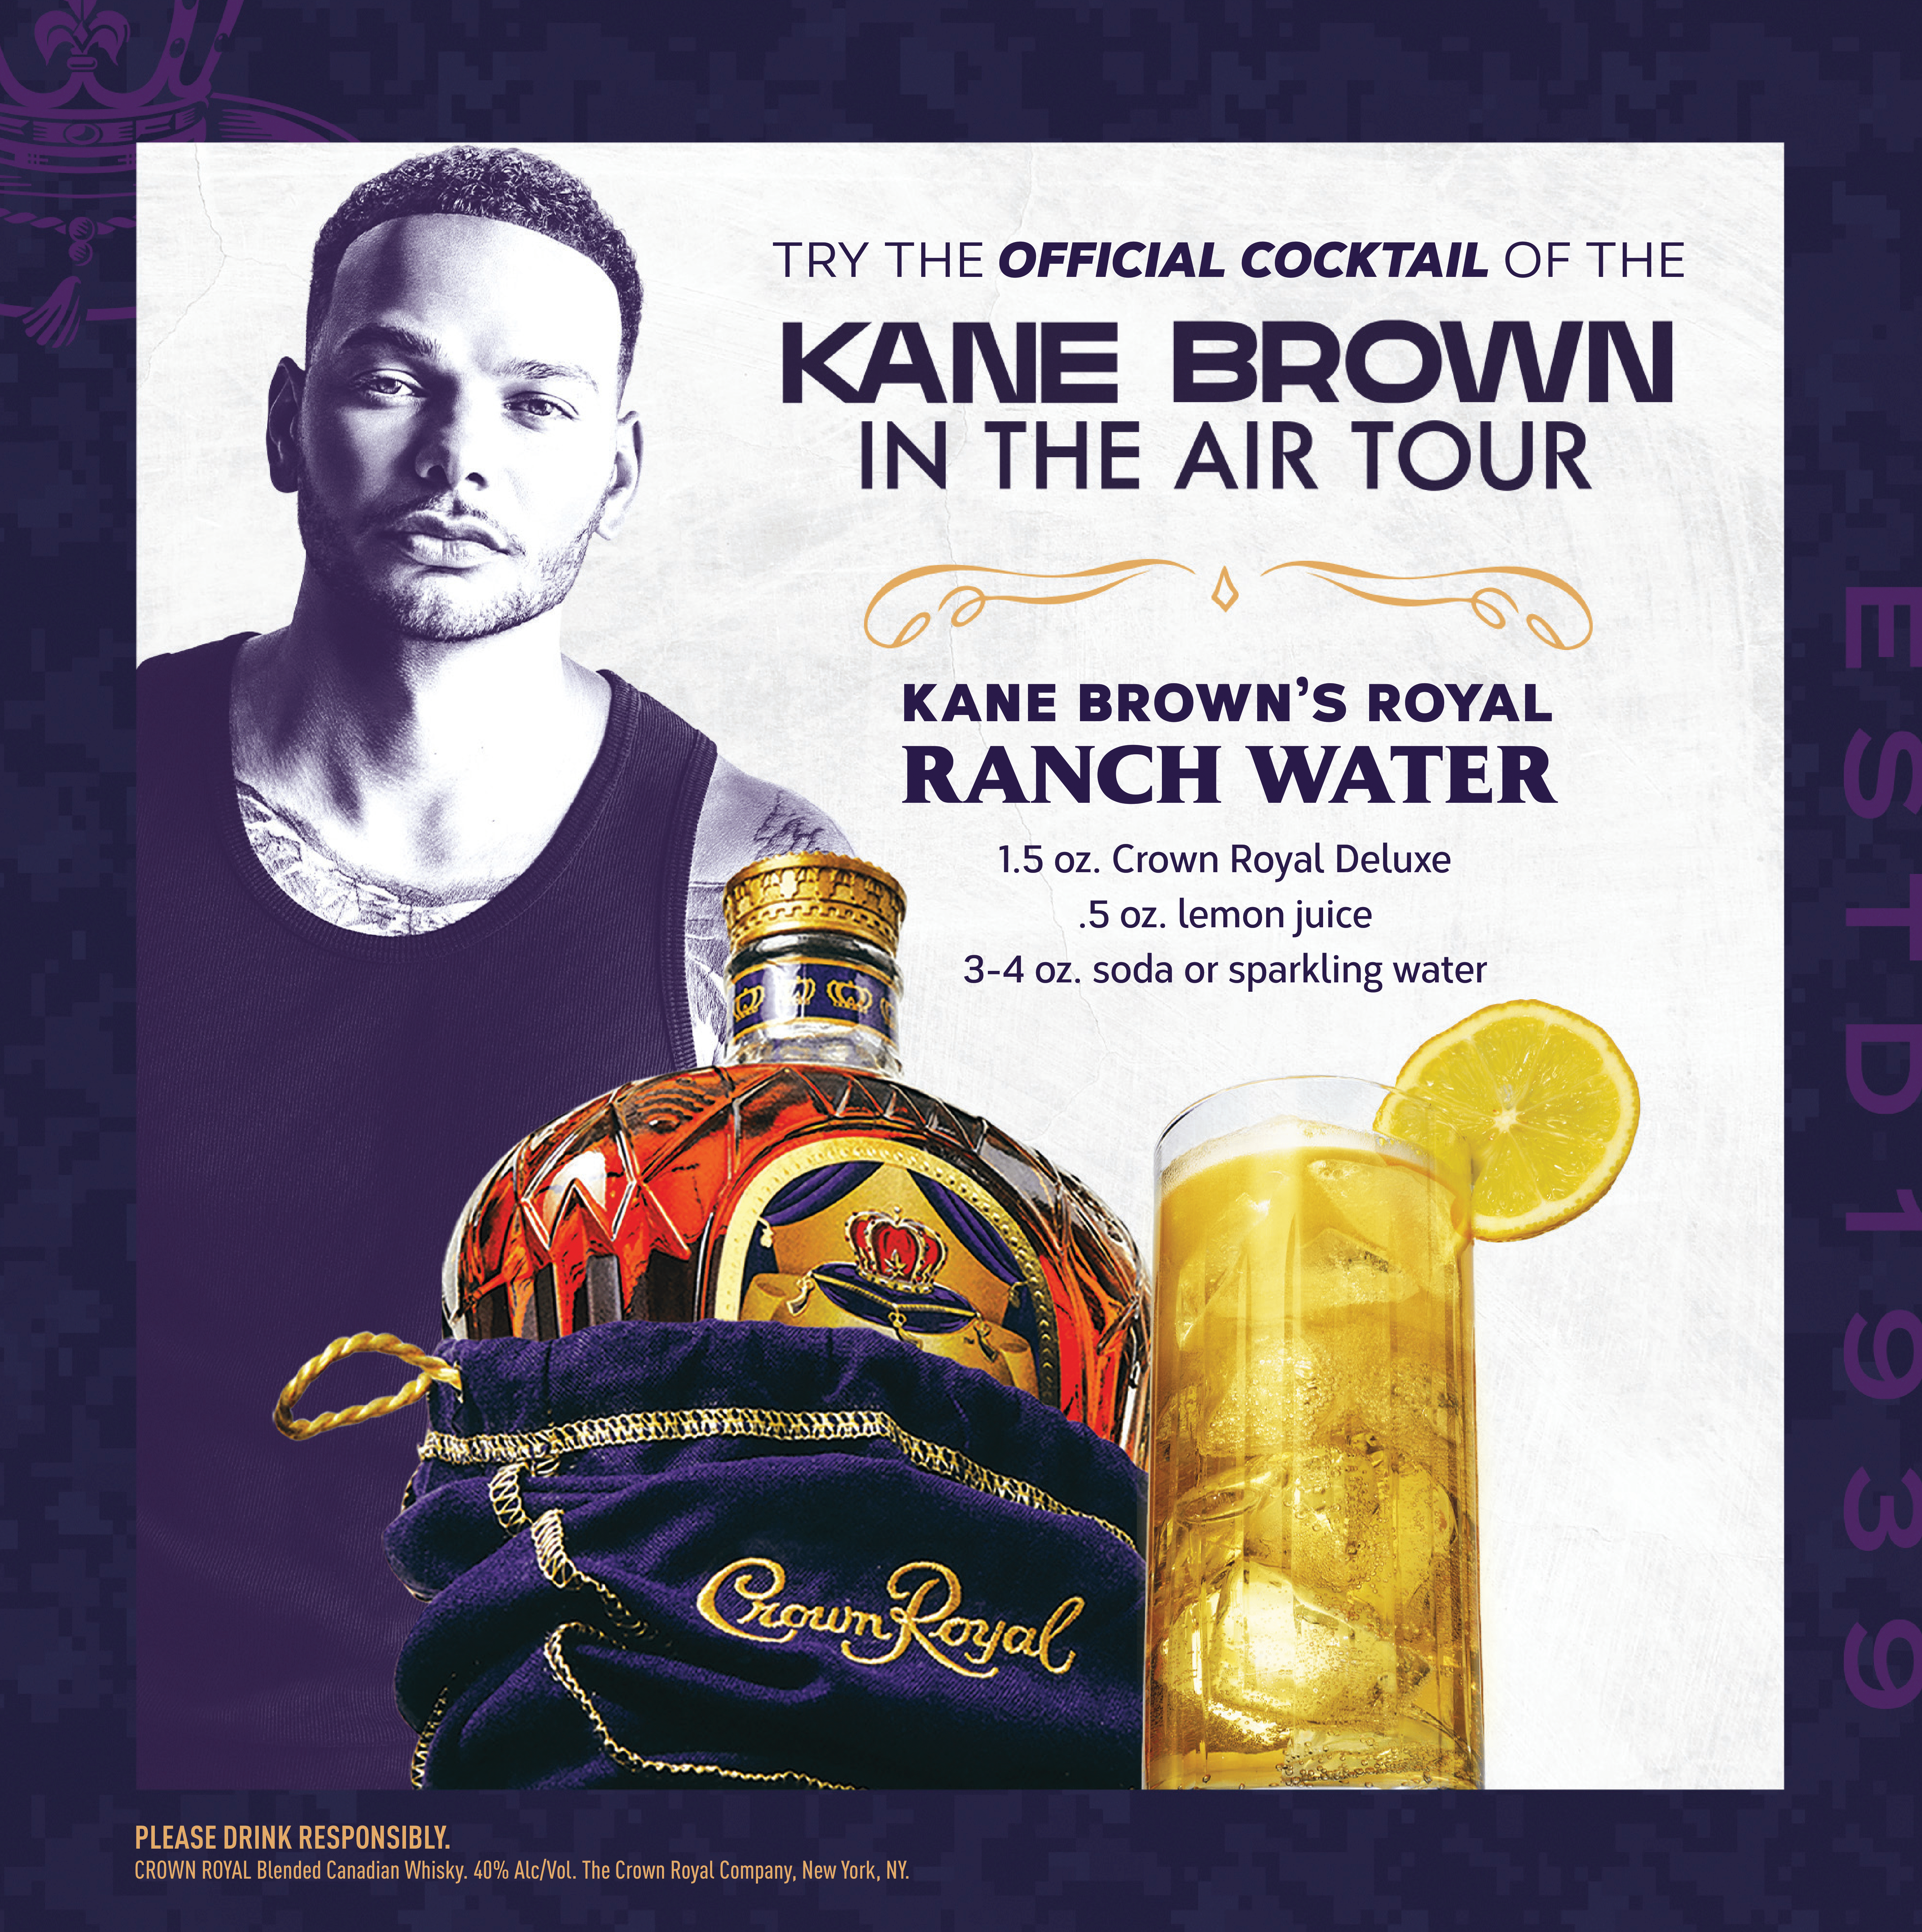 Crown Kane Brown's Royal Ranch Water Whisky Cocktail